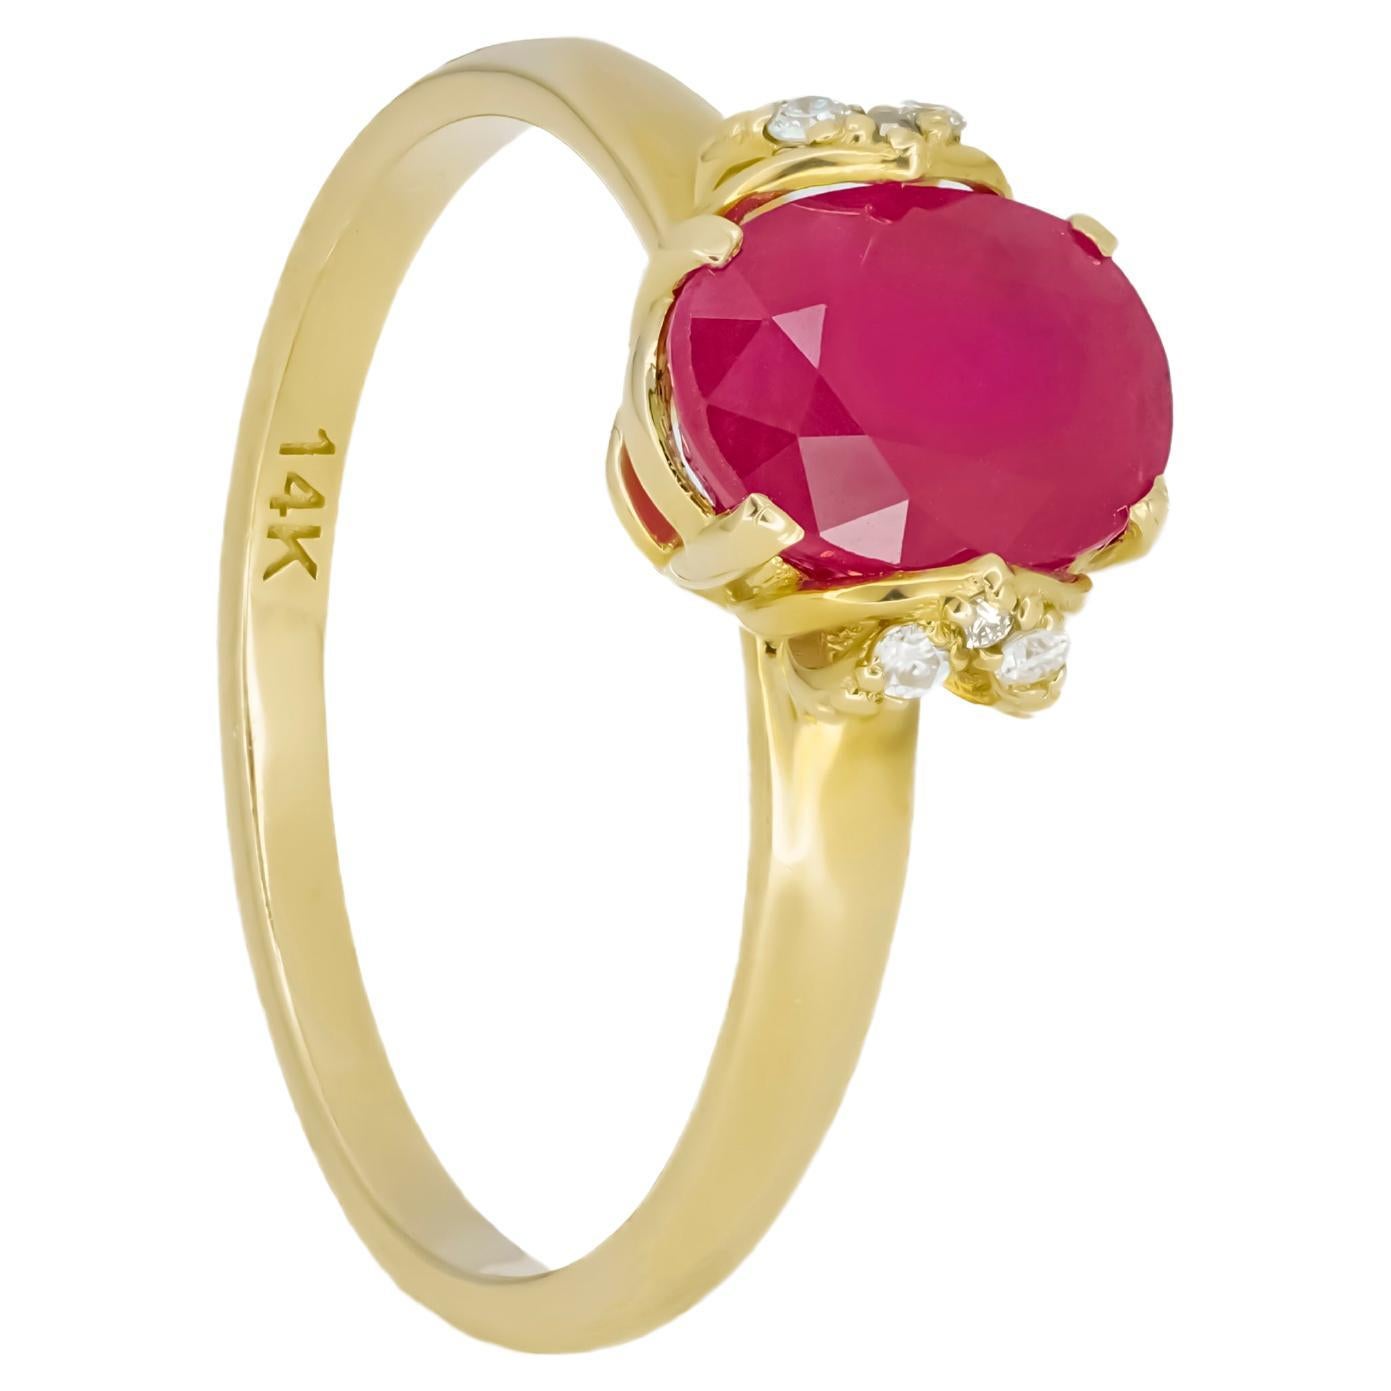 14 kt solid gold ring with natural ruby and diamonds. July birthstone.
Weight approx. 2.2 g. depends from size

Central stone: Natural ruby
Weight: approx. 1.2- 1.4 ct, oval cut.
Clarity: Transparent with inclusions
Surrounding stone:
Diamonds: